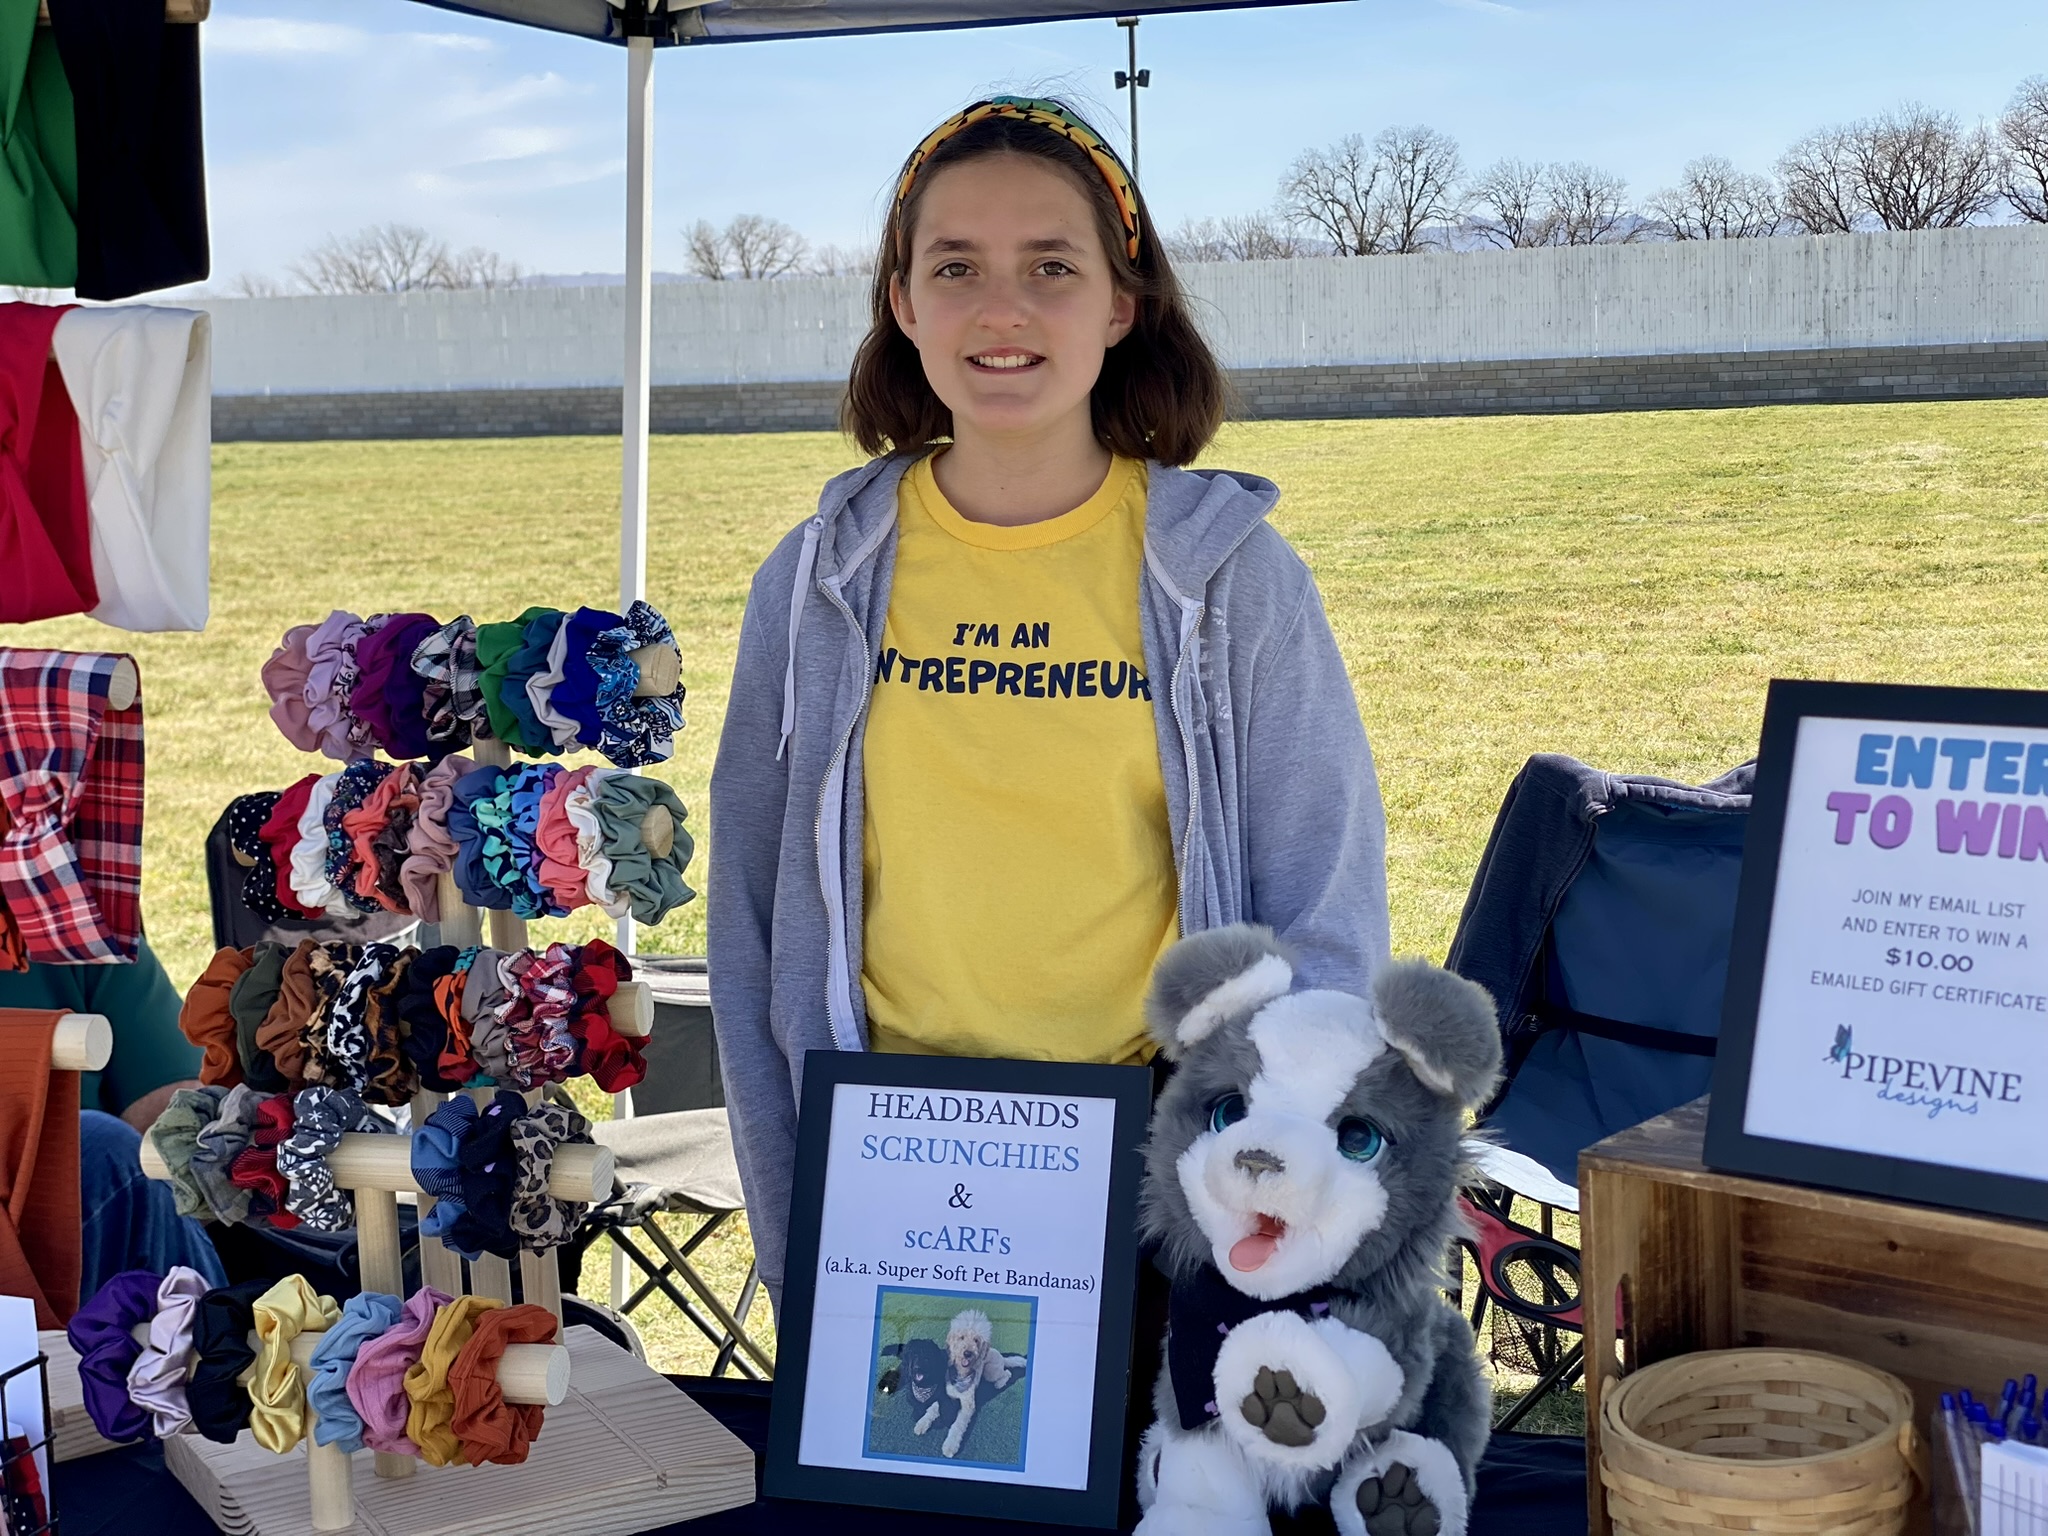 Meet Kenzie, 11, owner of Pipevine Designs. Kenzie attended 3 markets this Spring in Arizona!